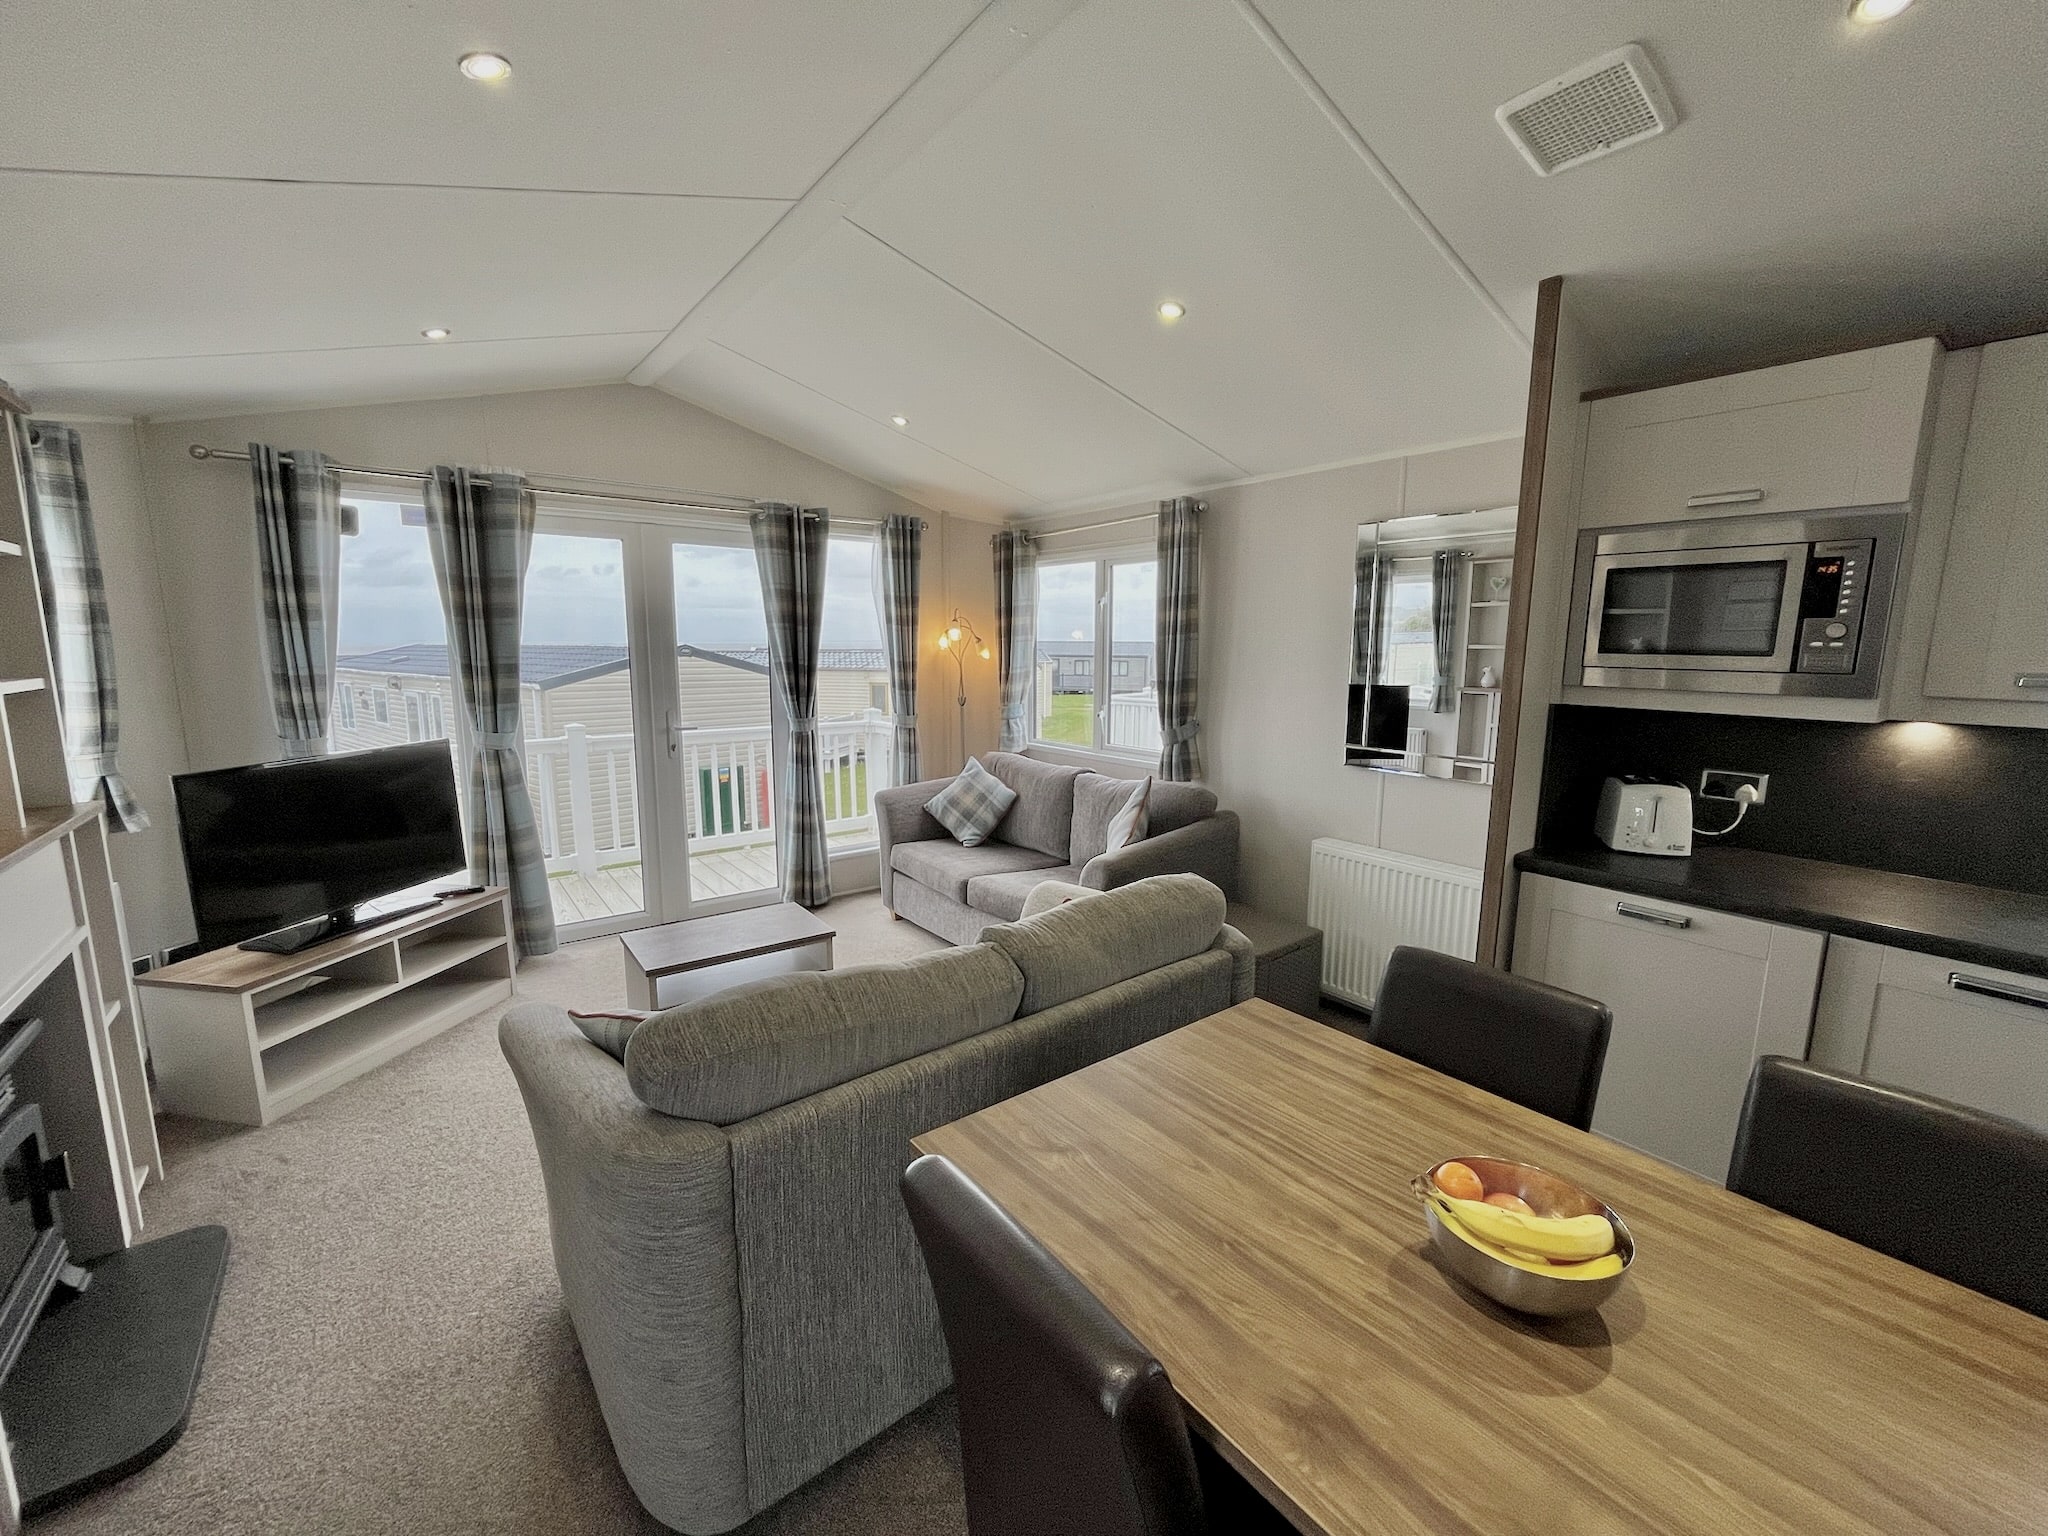 2017 Willerby Sheraton for sale at Doniford Holiday Park, Somerset